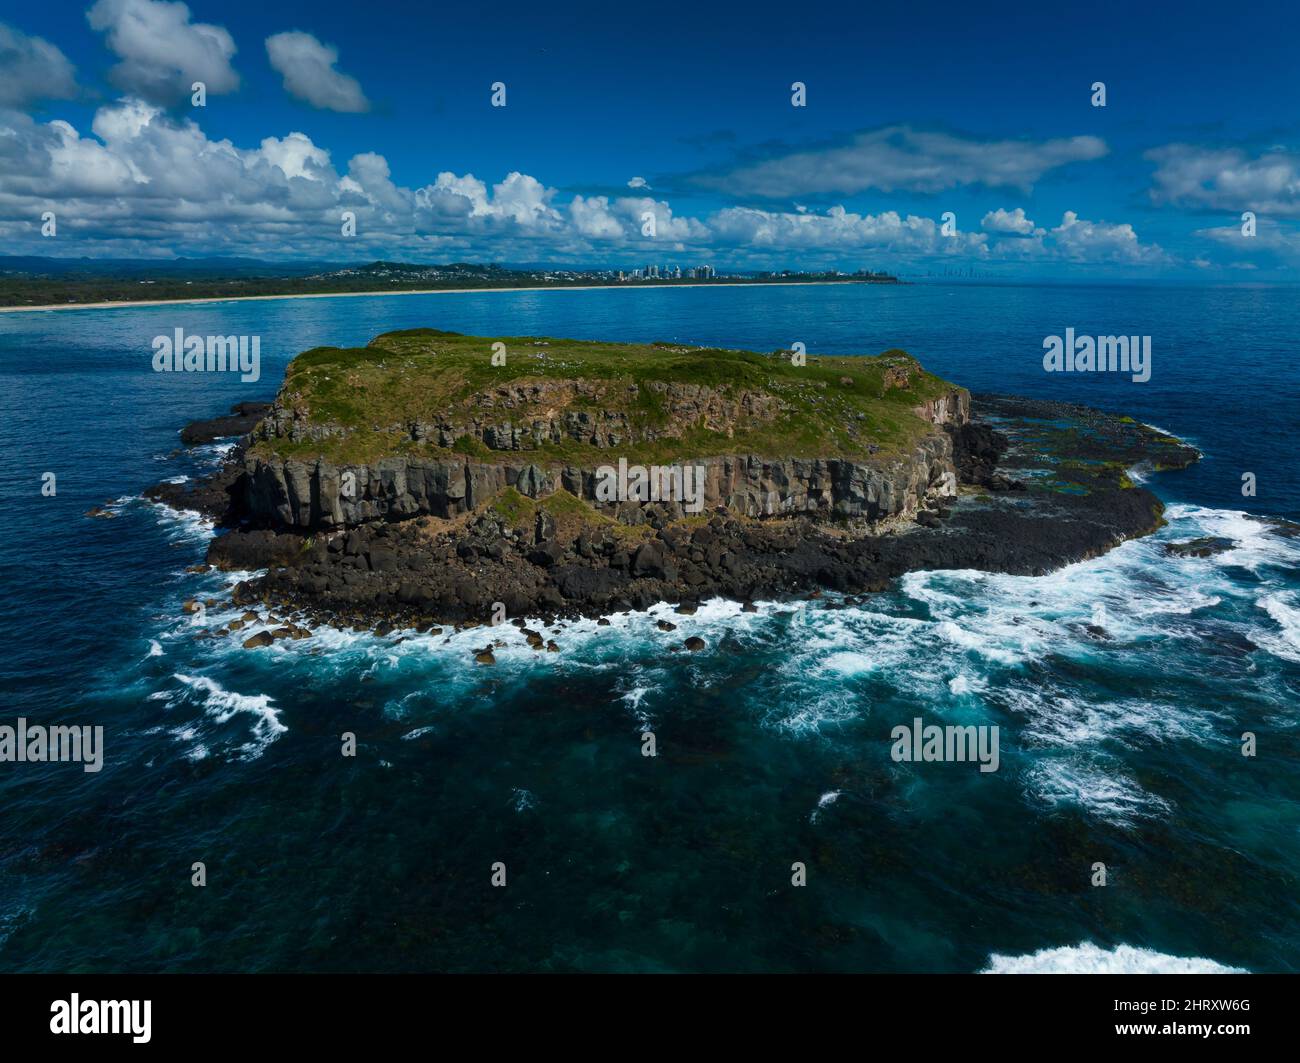 Cook Island off Fingal Head and Tweed Heads Stock Photo